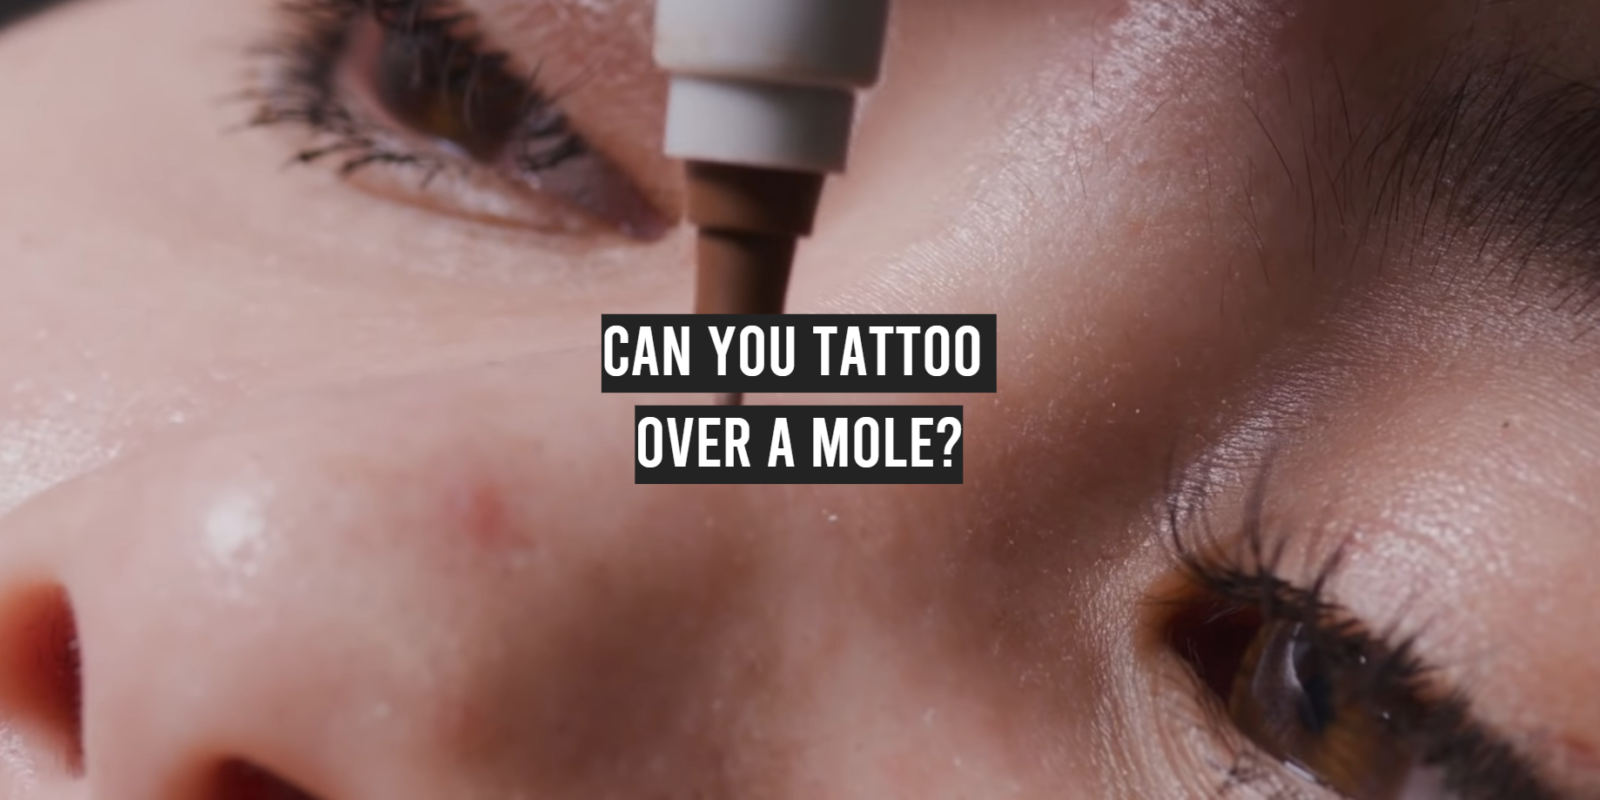 Can You Tattoo Over a Mole?